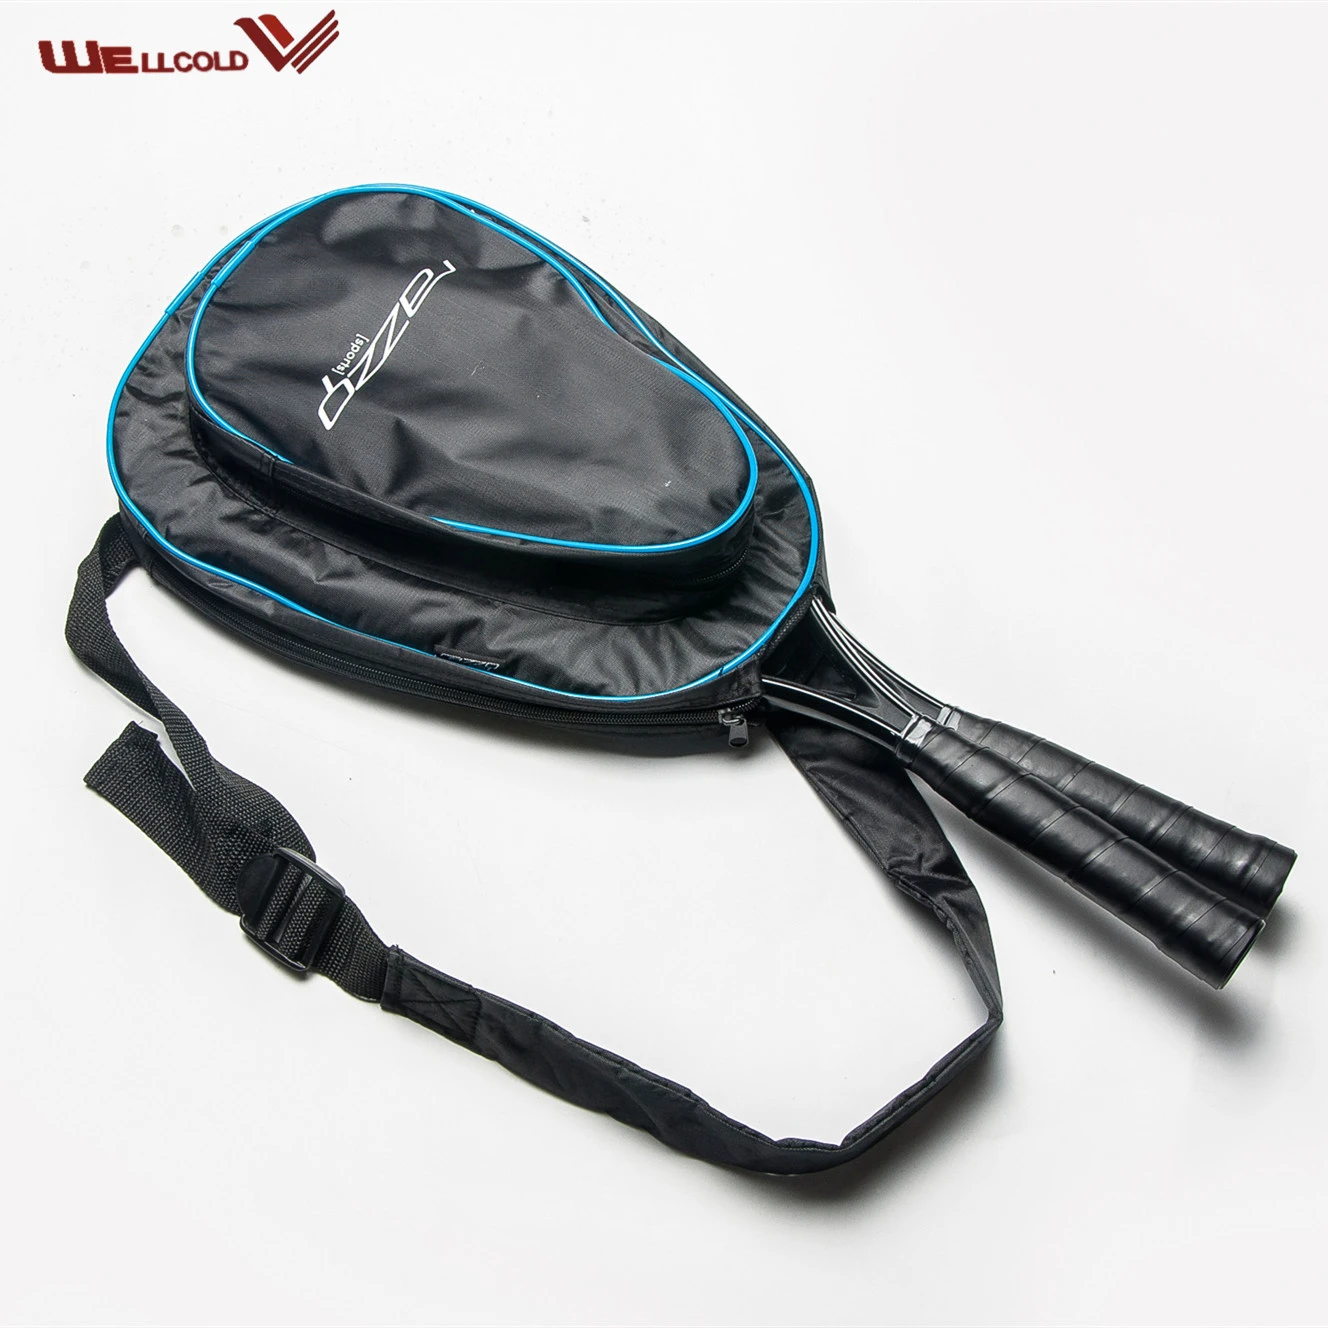 Design Your Own Squash Racket Best Selling Speed Badminton Racquet Set With Squash Racket Bag